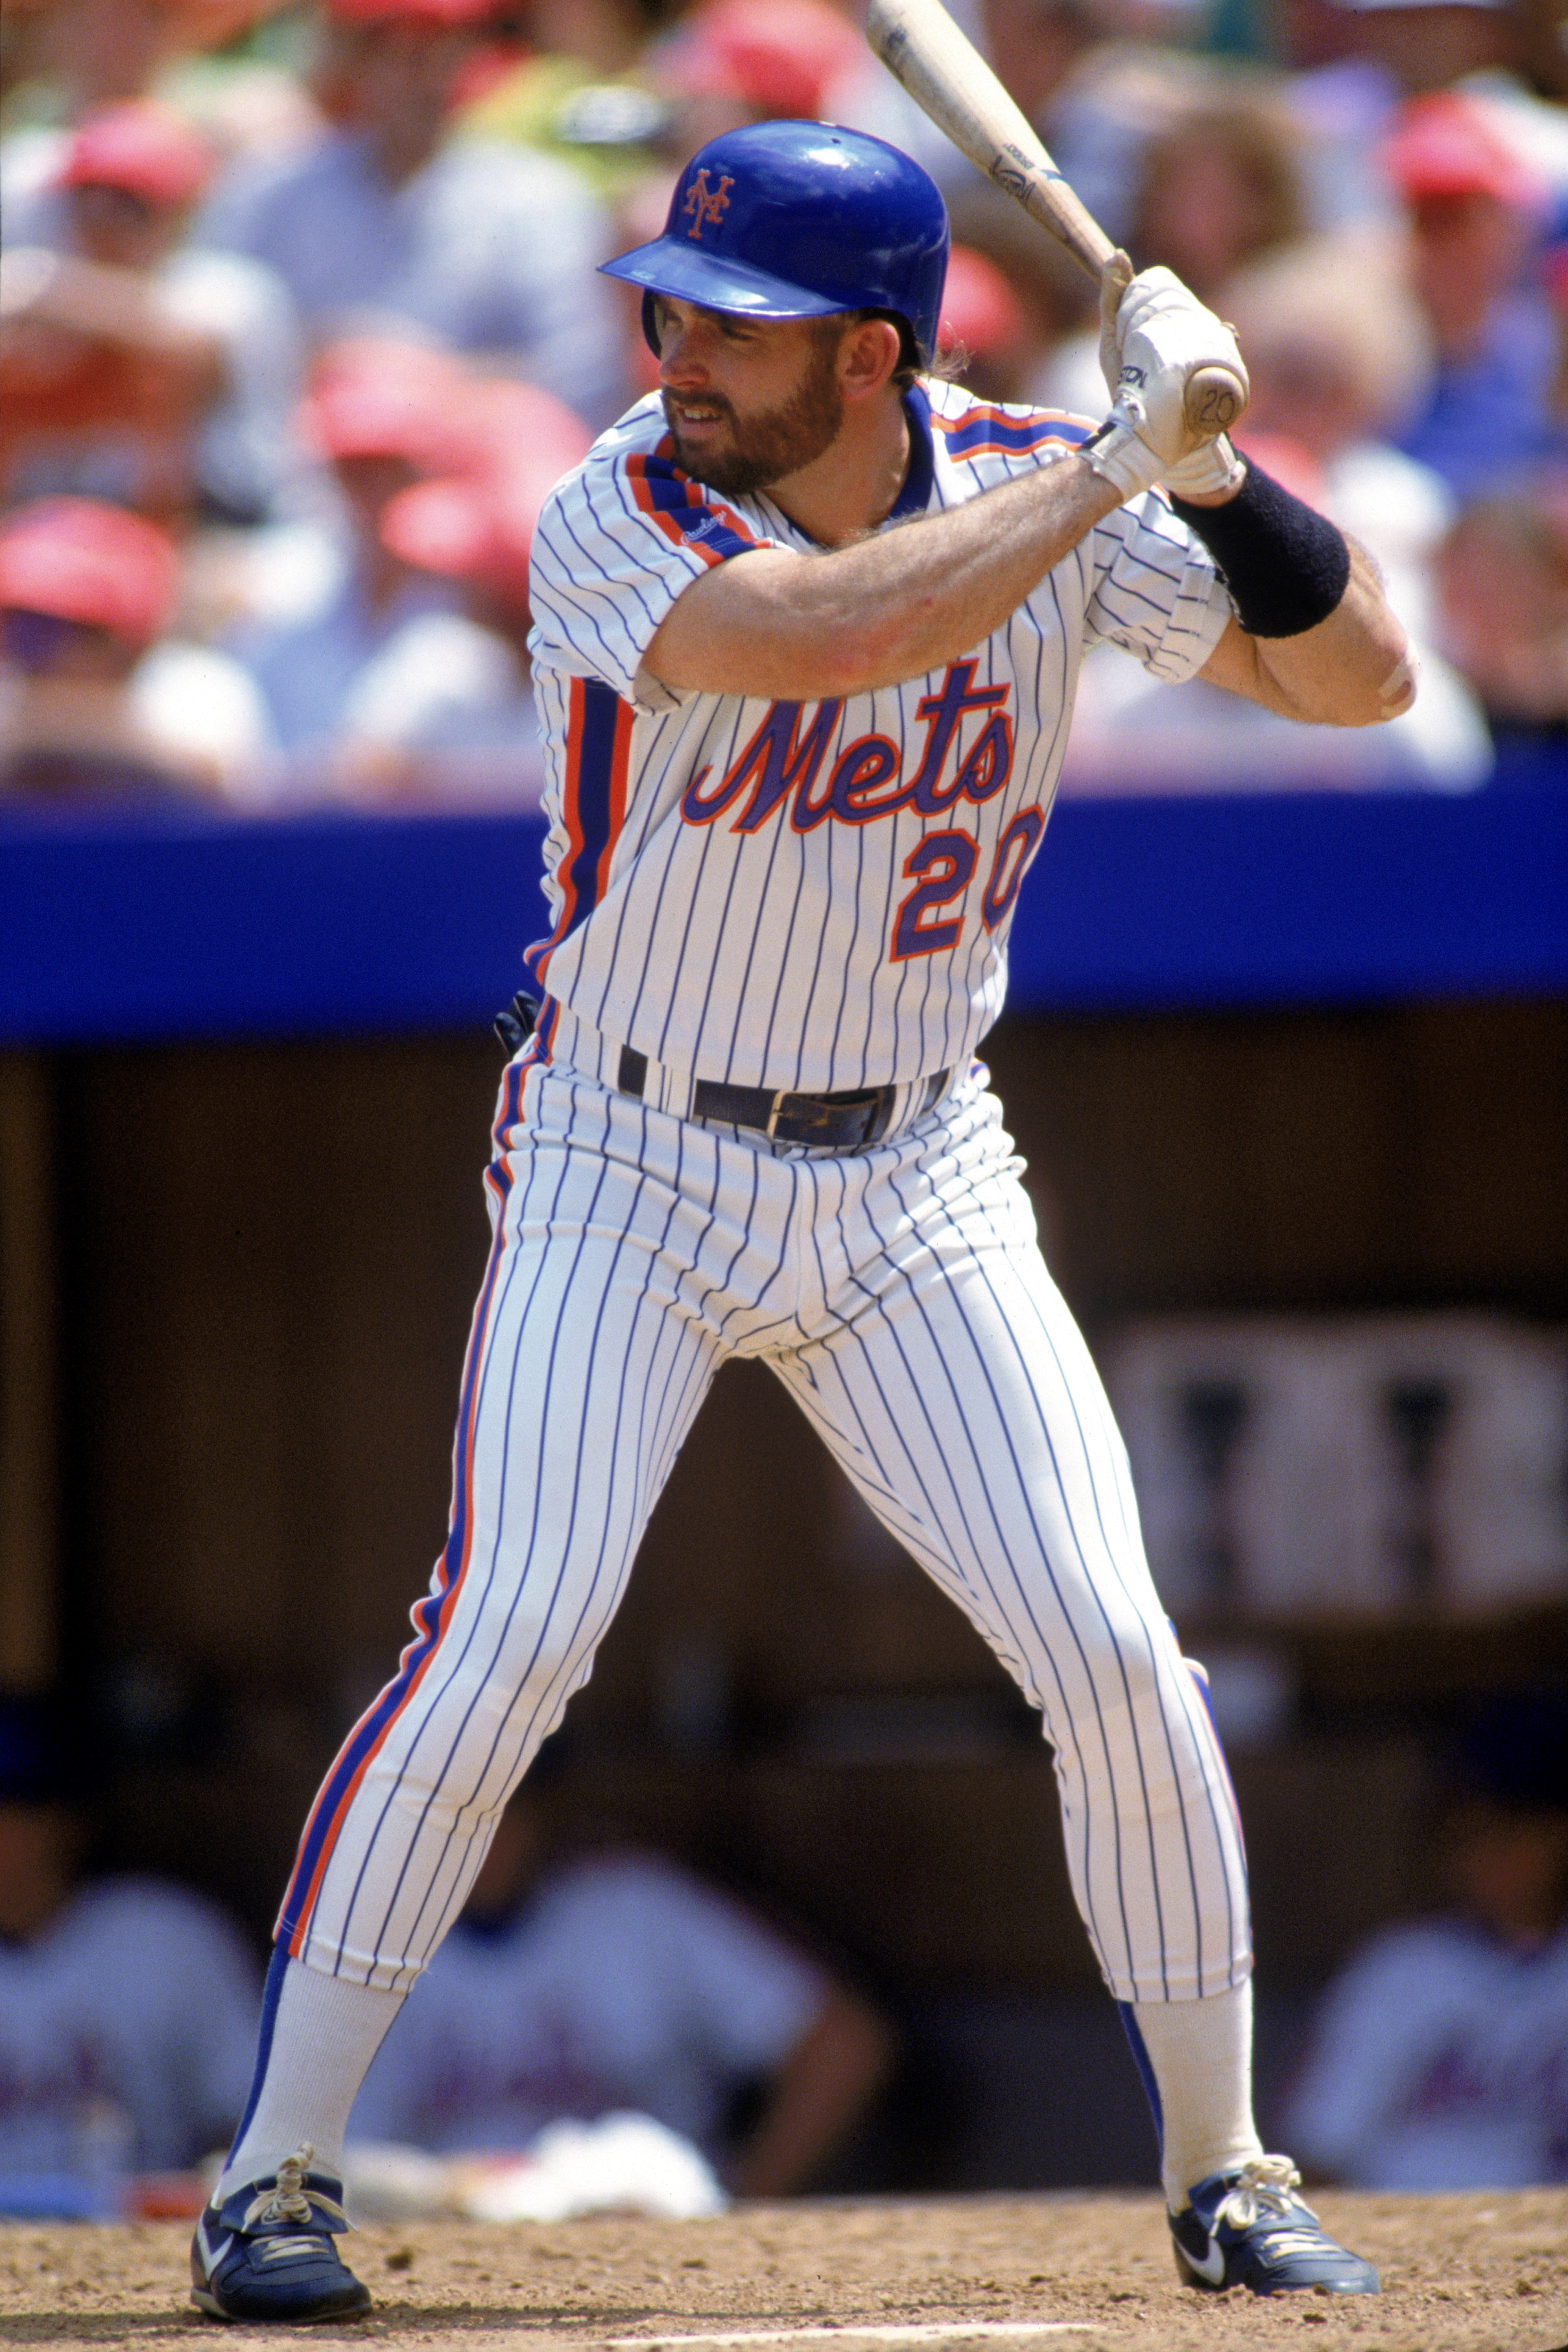 Best Mets players by uniform number